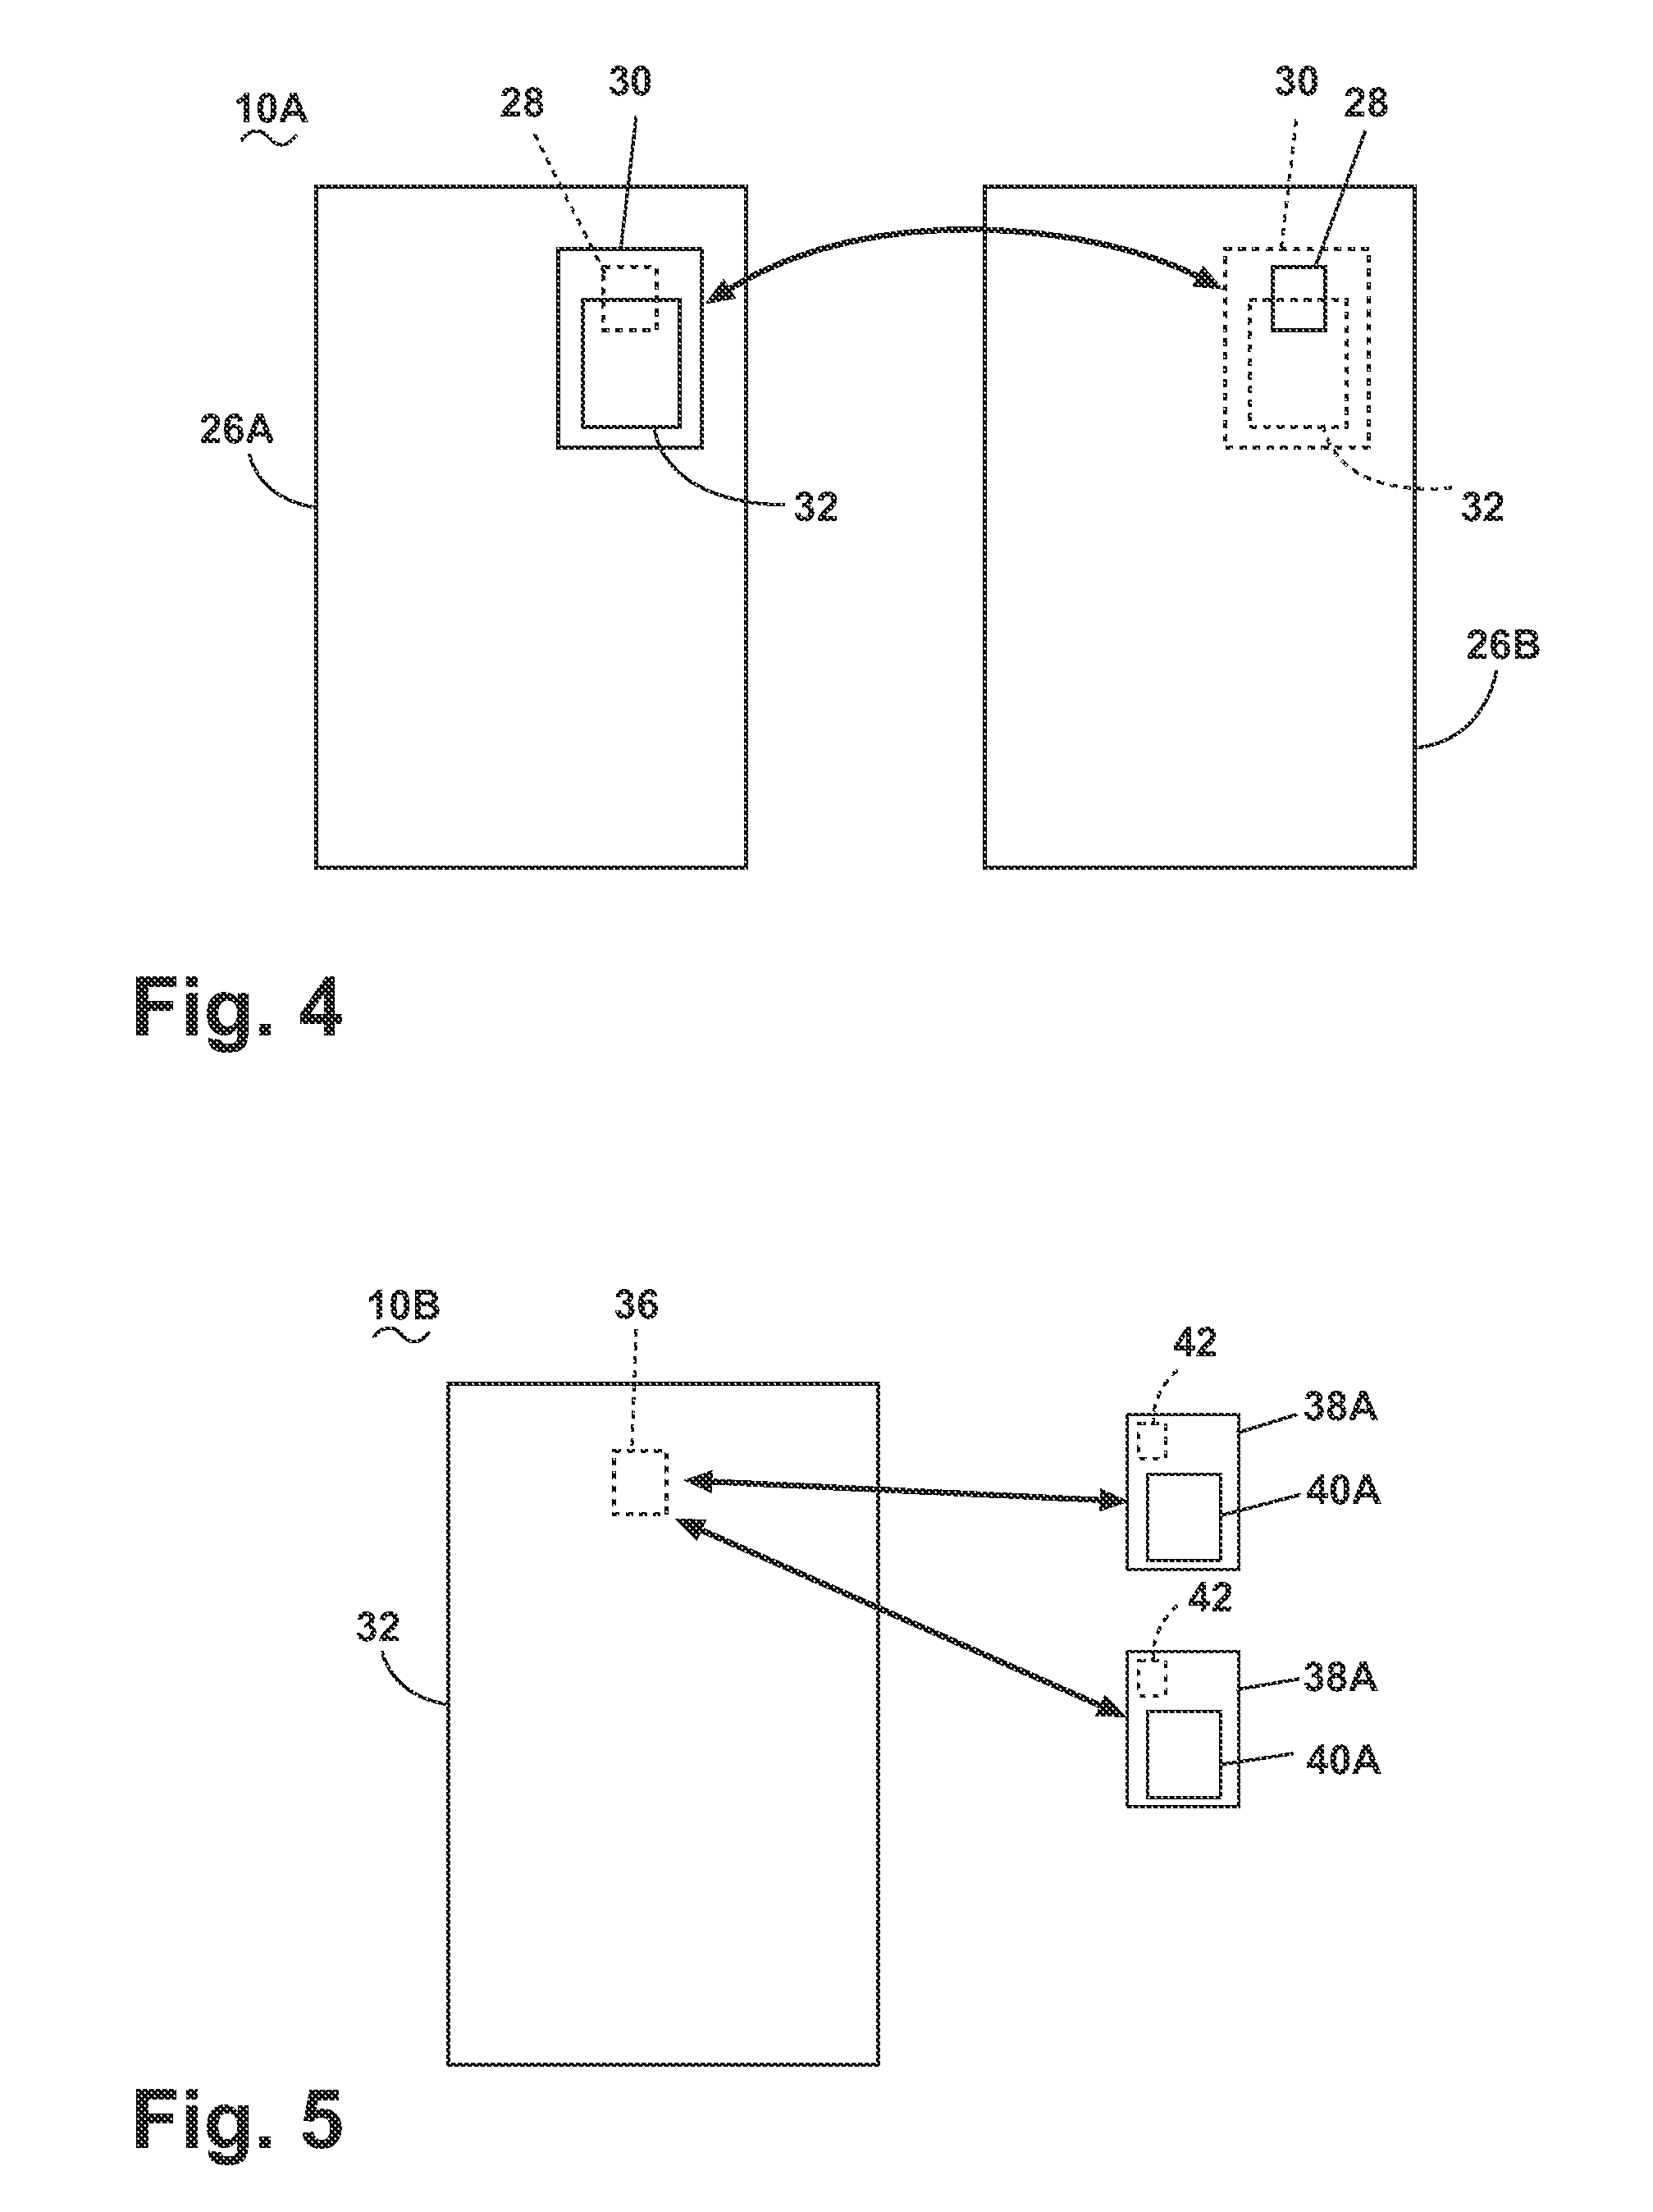 Appliance with an electrically adaptive adapter to alternatively couple multiple consumer electronic devices